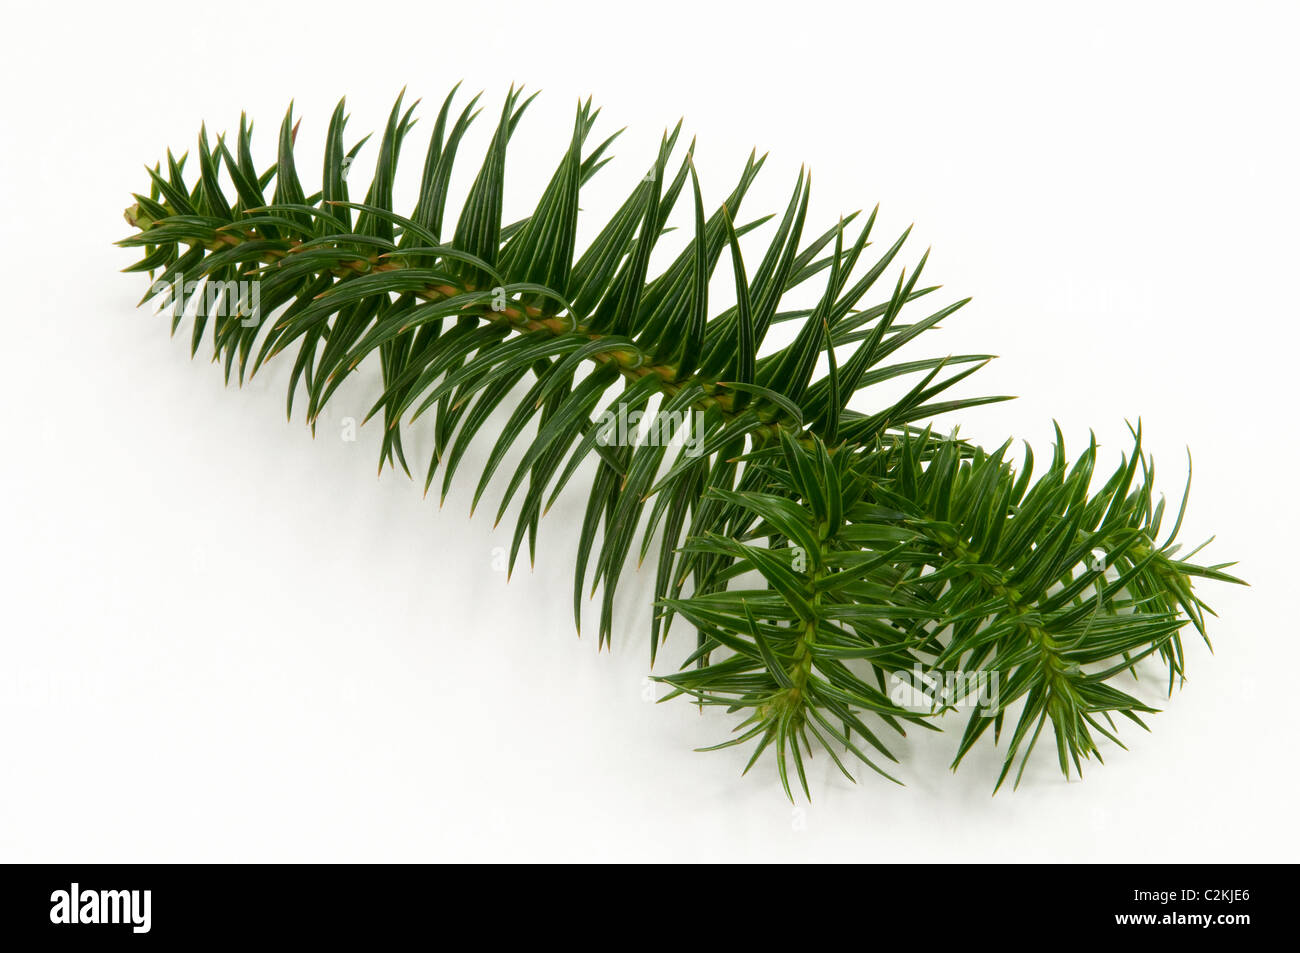 China Fir (Cunninghamia lanceolata), twig. Studio picture against a white background. Stock Photo